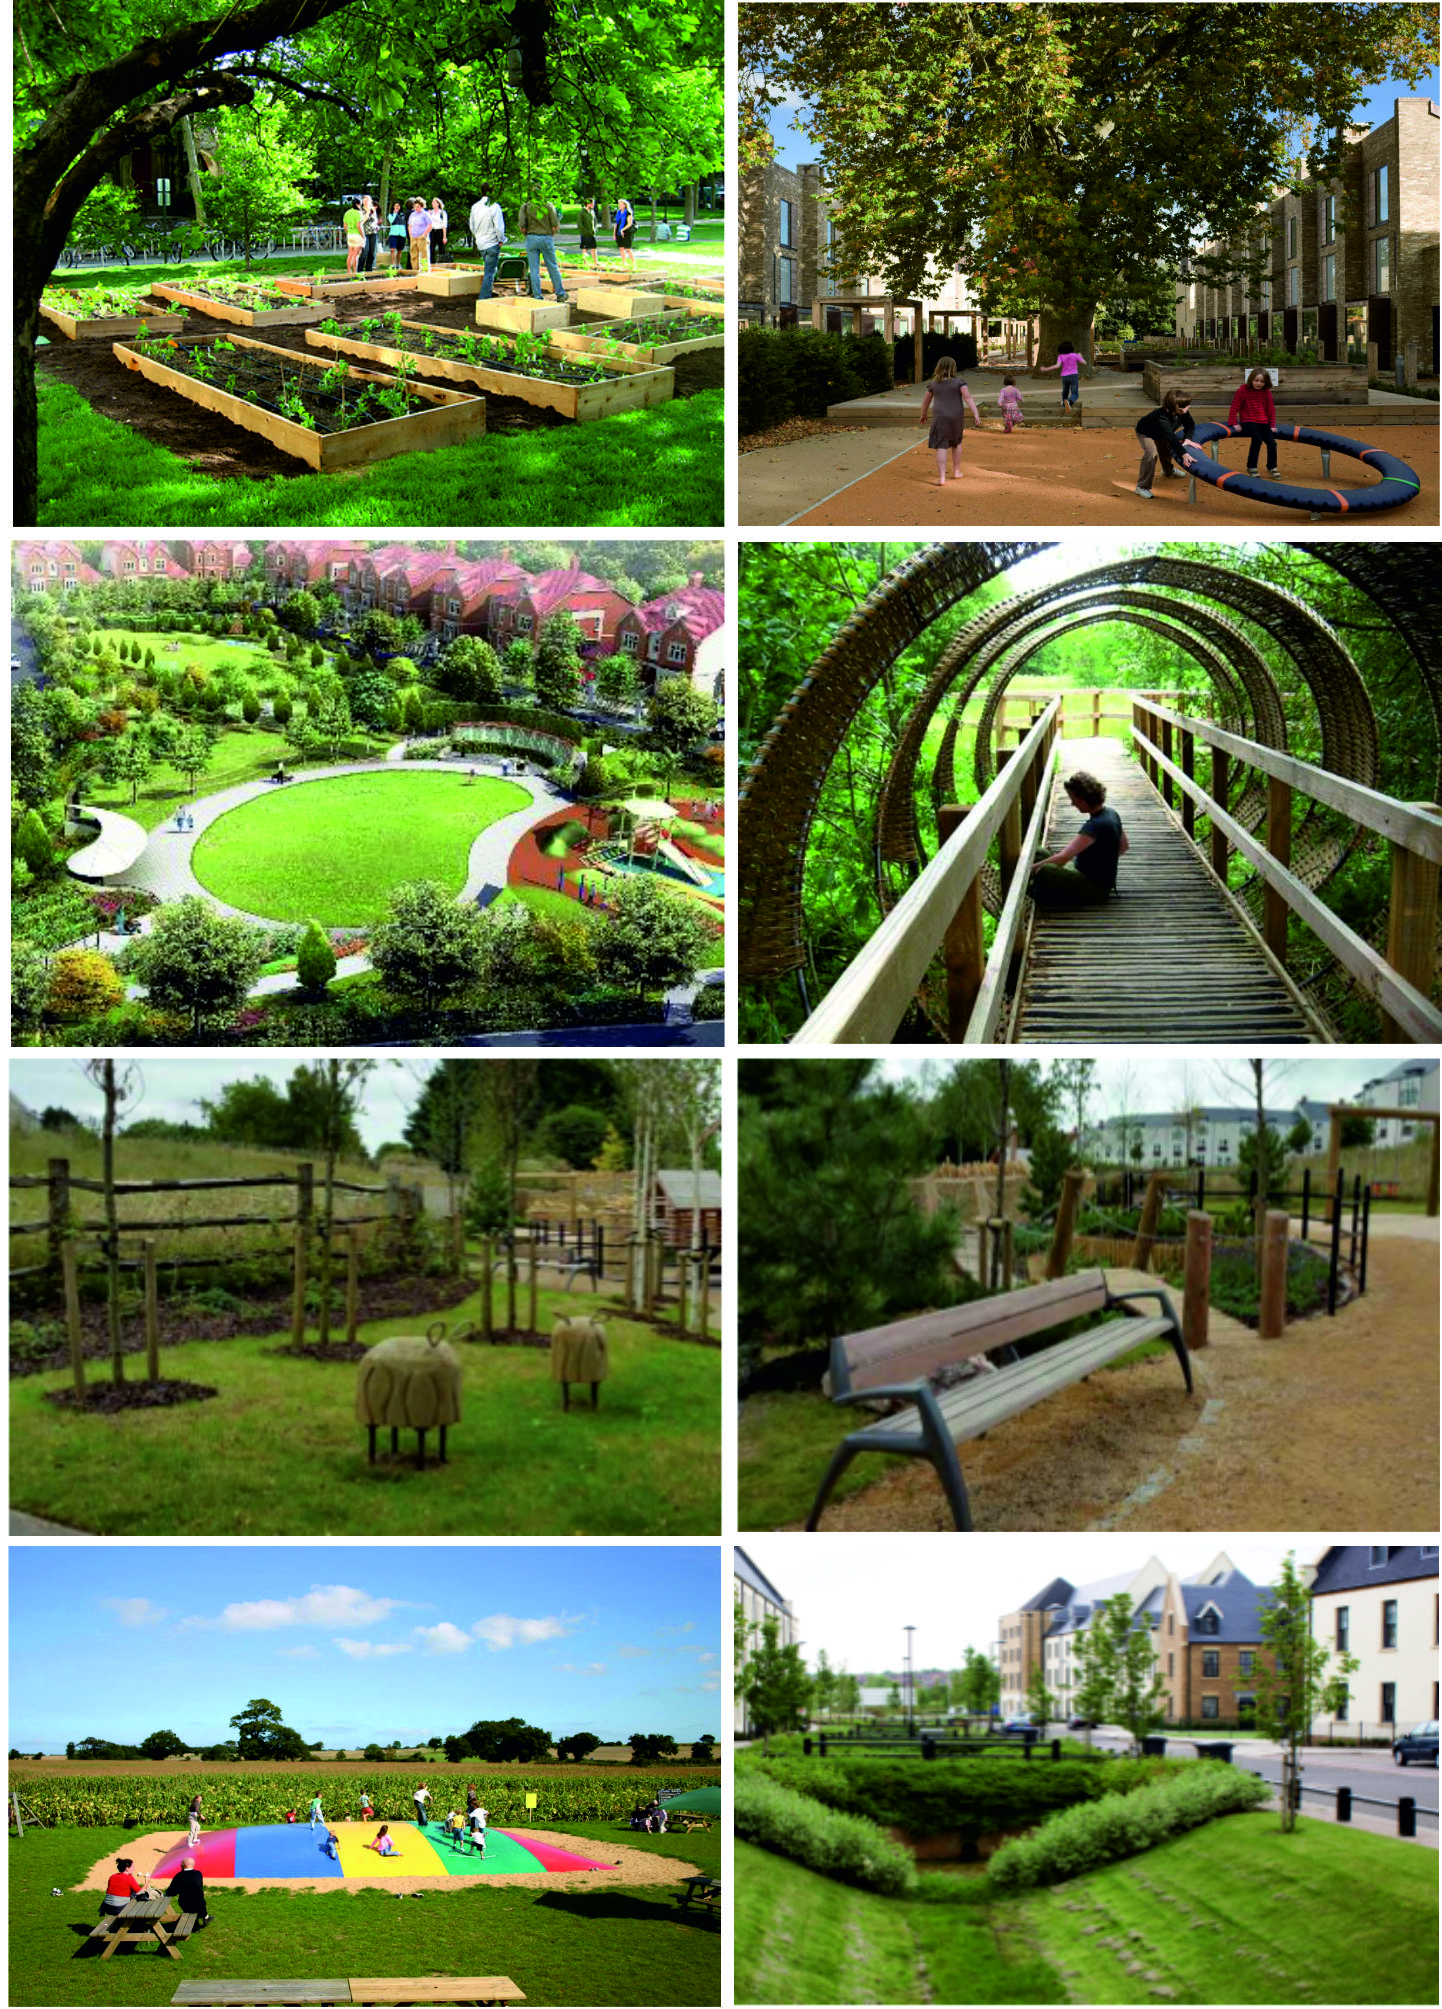 Public space ideas - creative green space and public realm